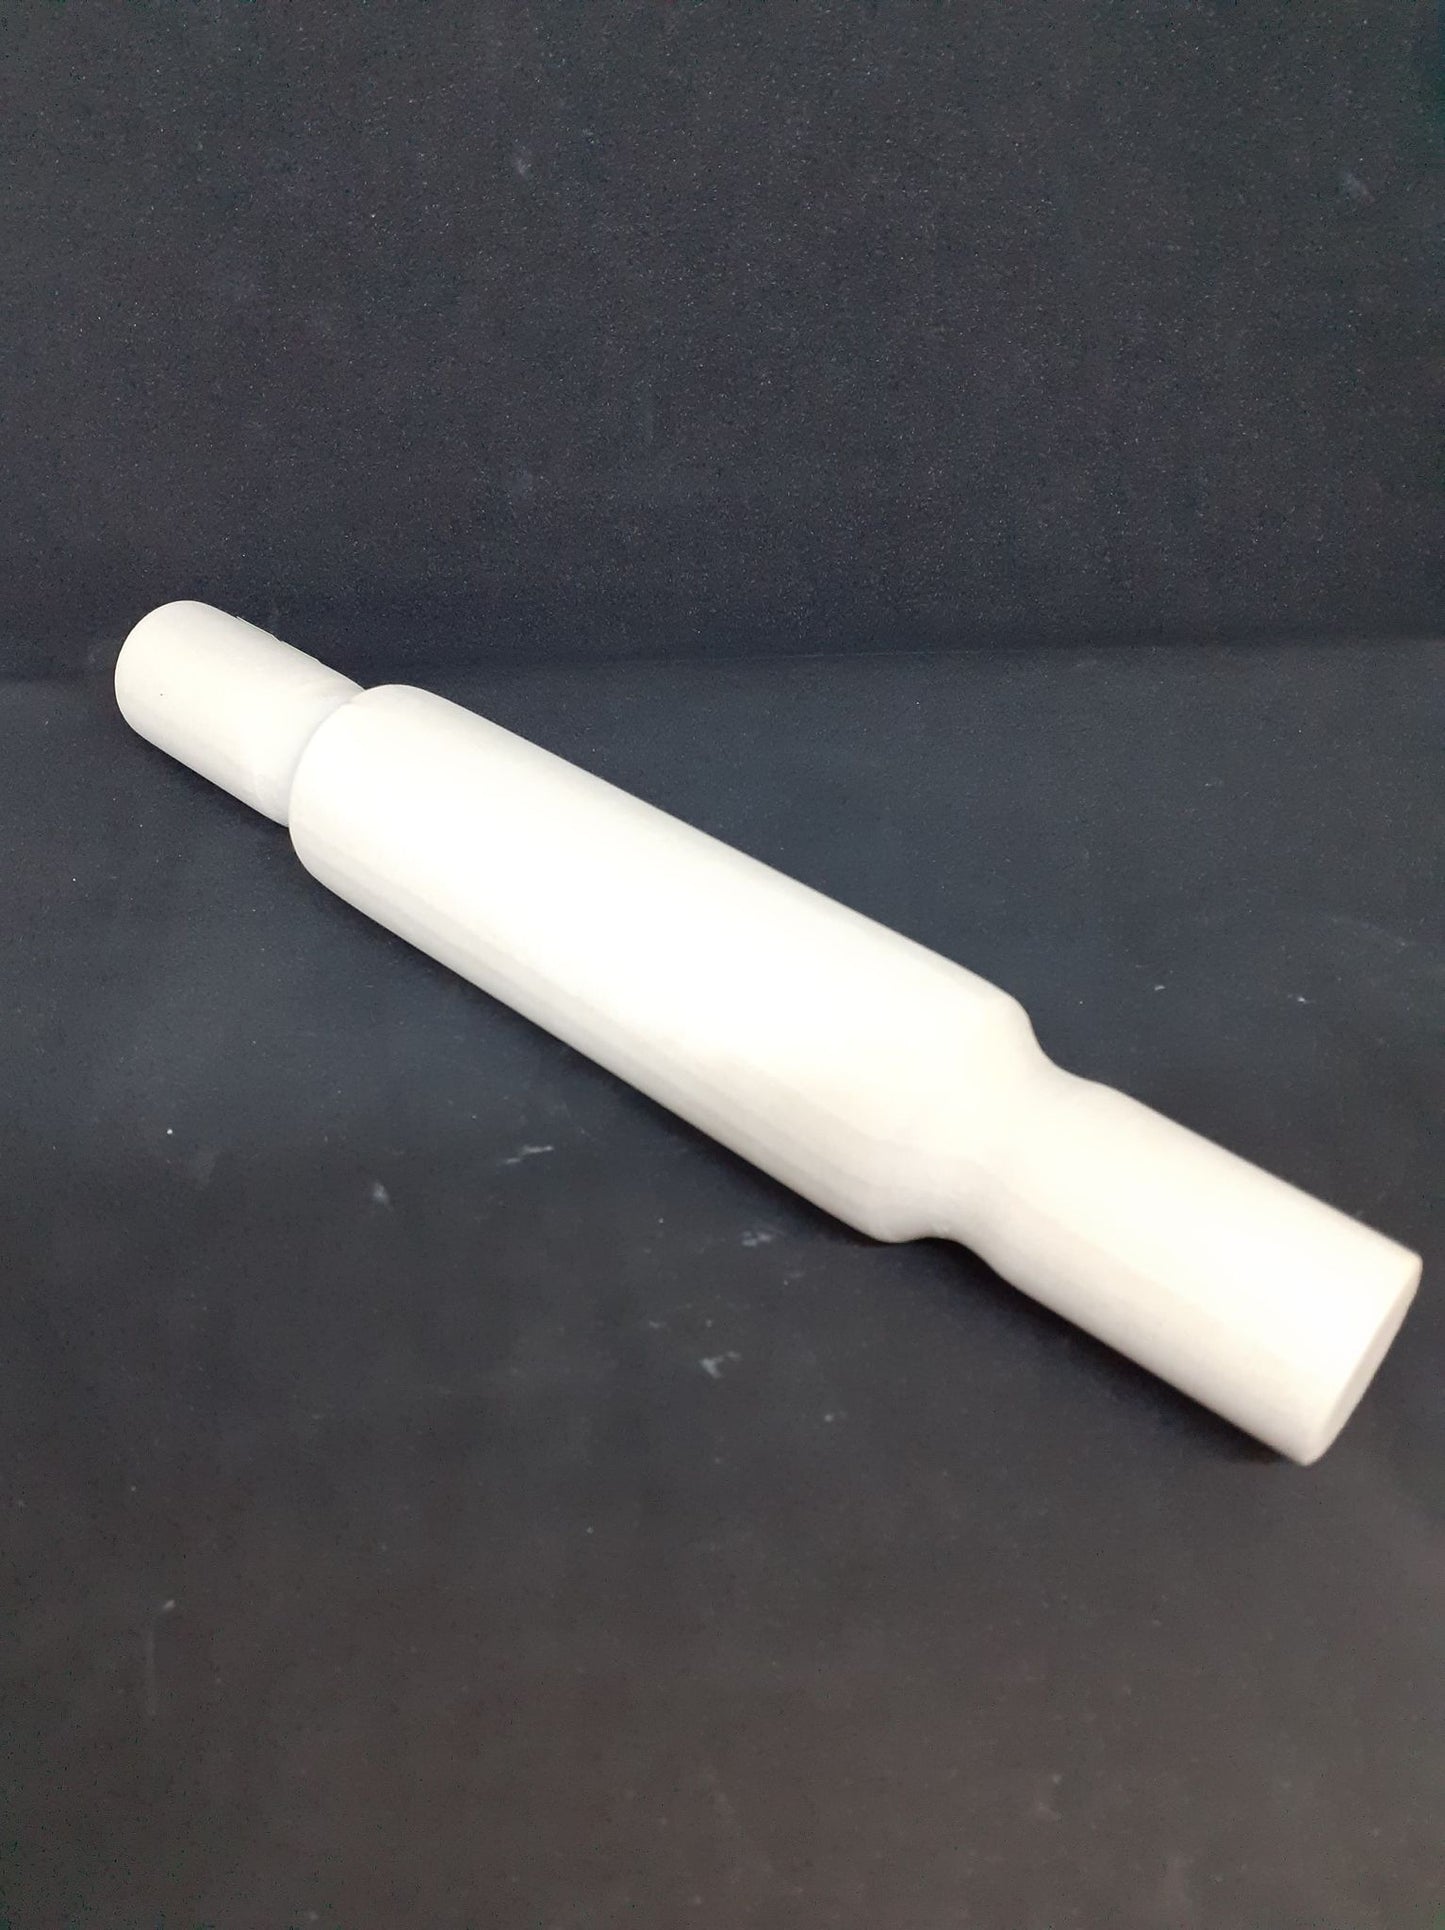 Wooden Rolling Pin Available In Store CLY